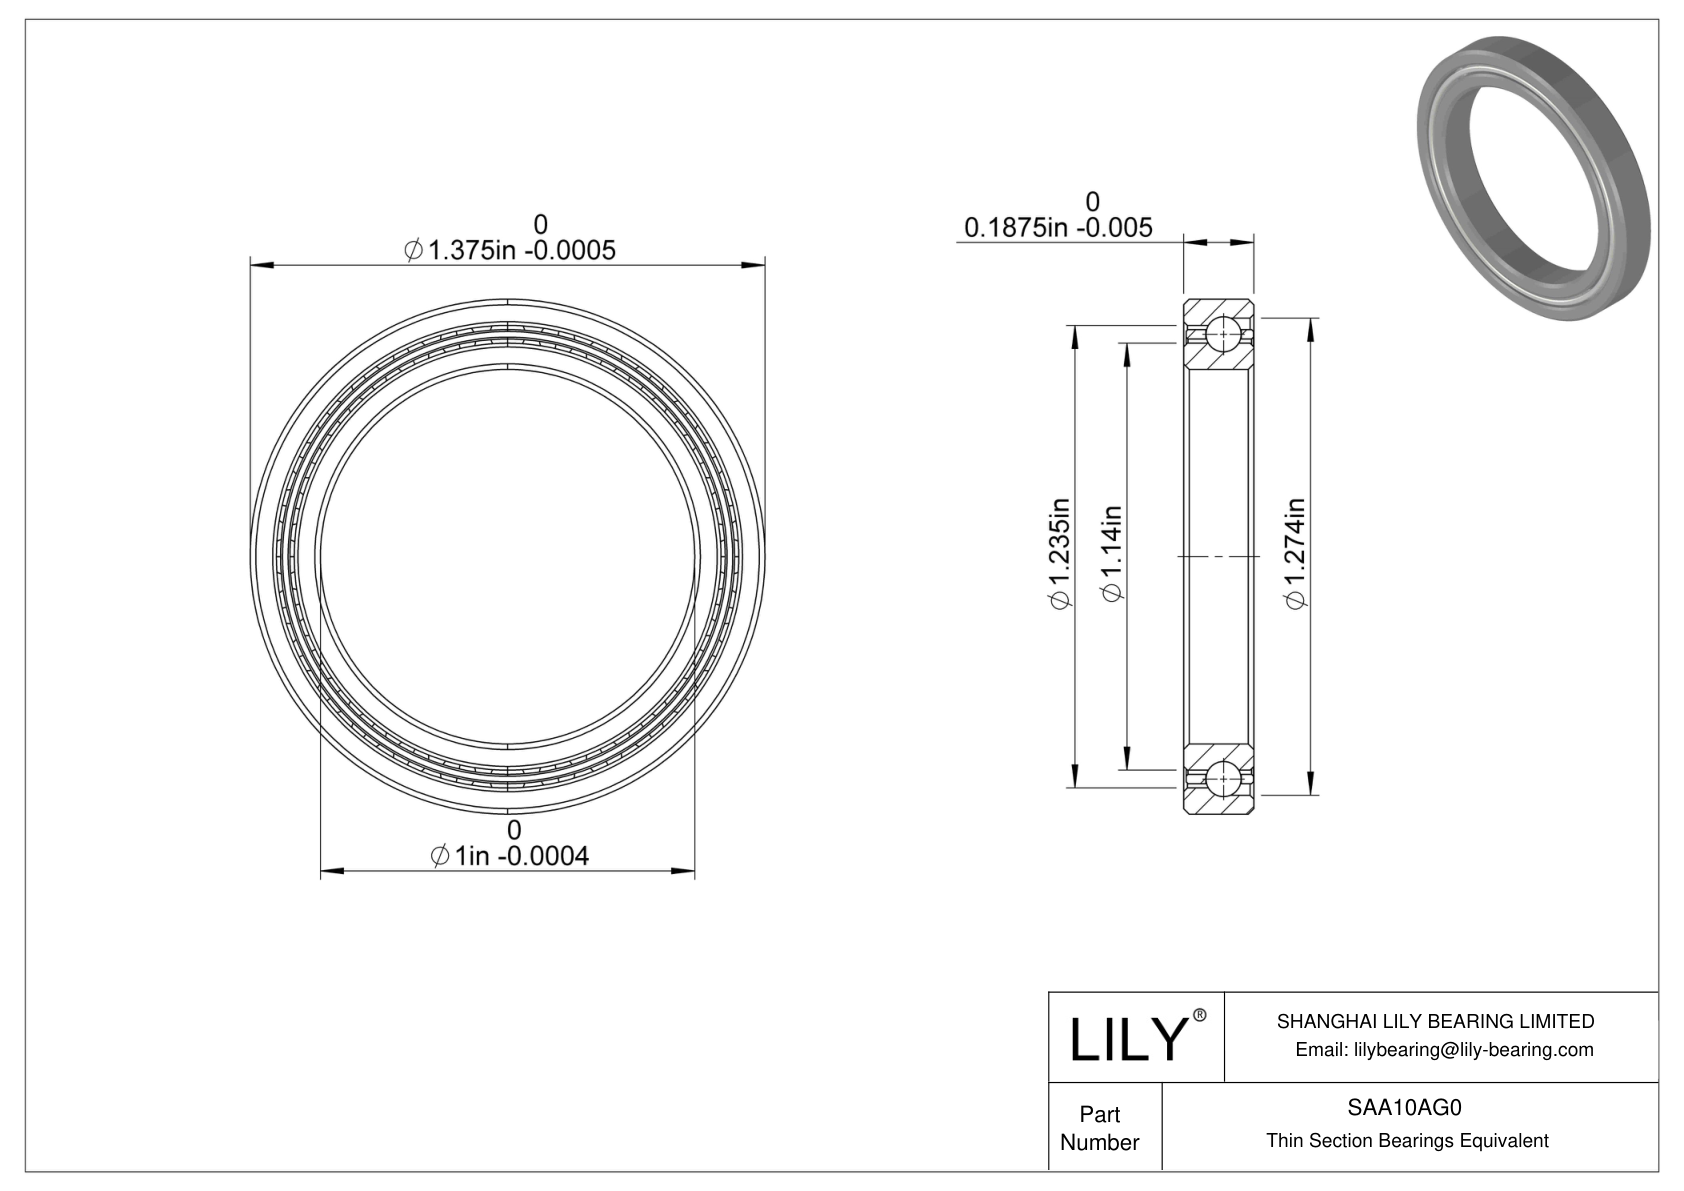 SAA10AG0 Constant Section (CS) Bearings cad drawing